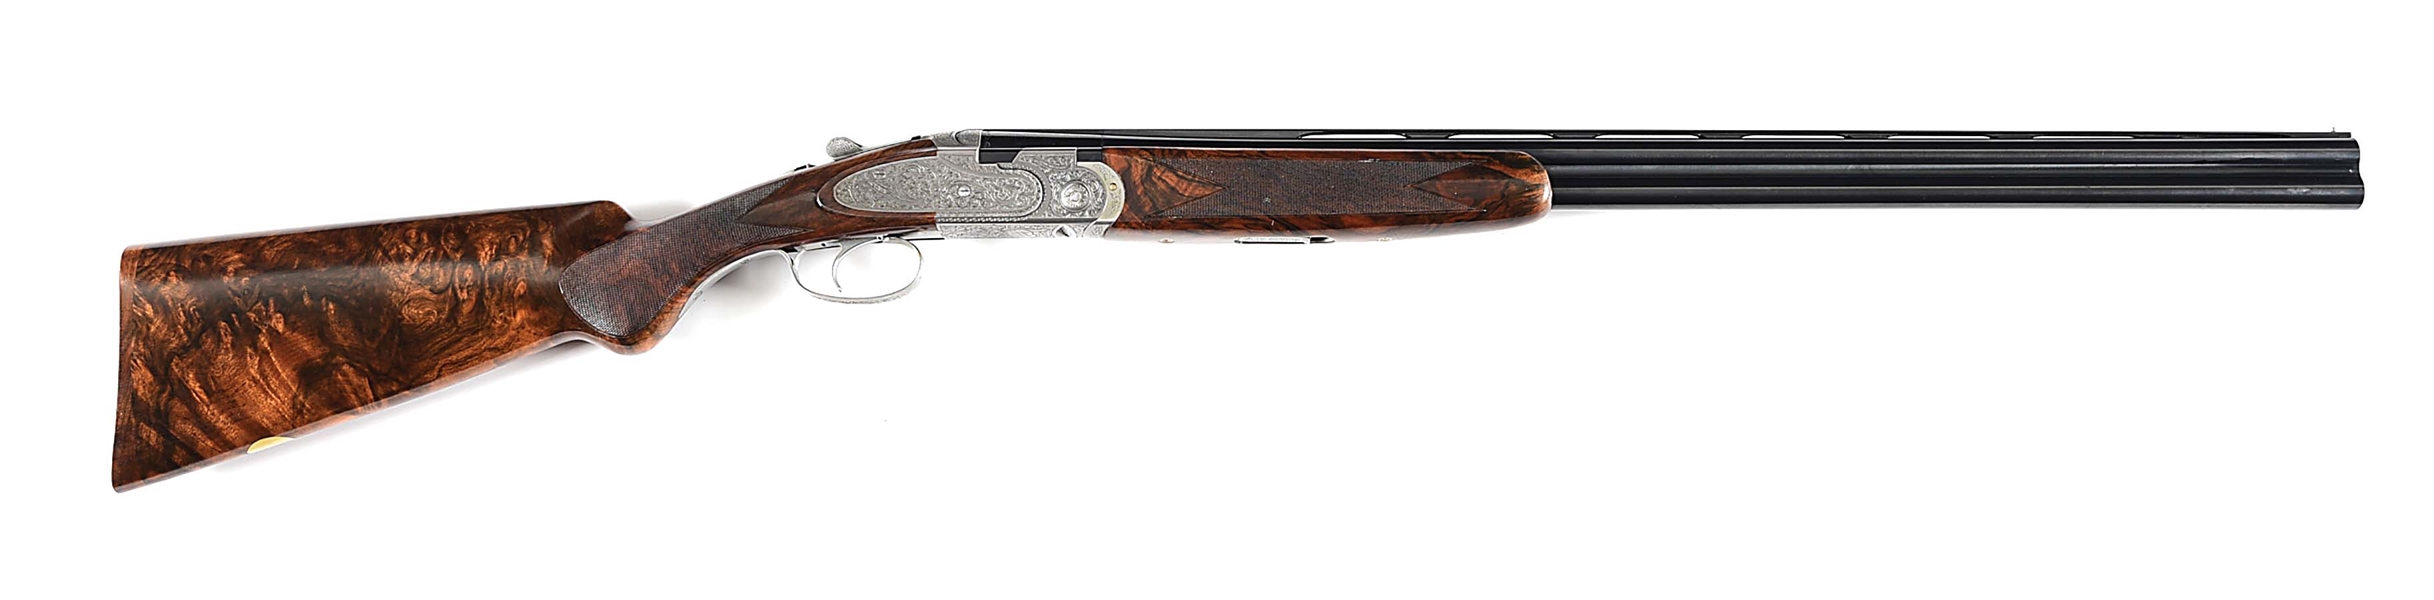 (M) BERETTA 687 EELL 20 GAUGE OVER/UNDER SHOTGUN WITH ENGRAVING BY GIOVANELLI.